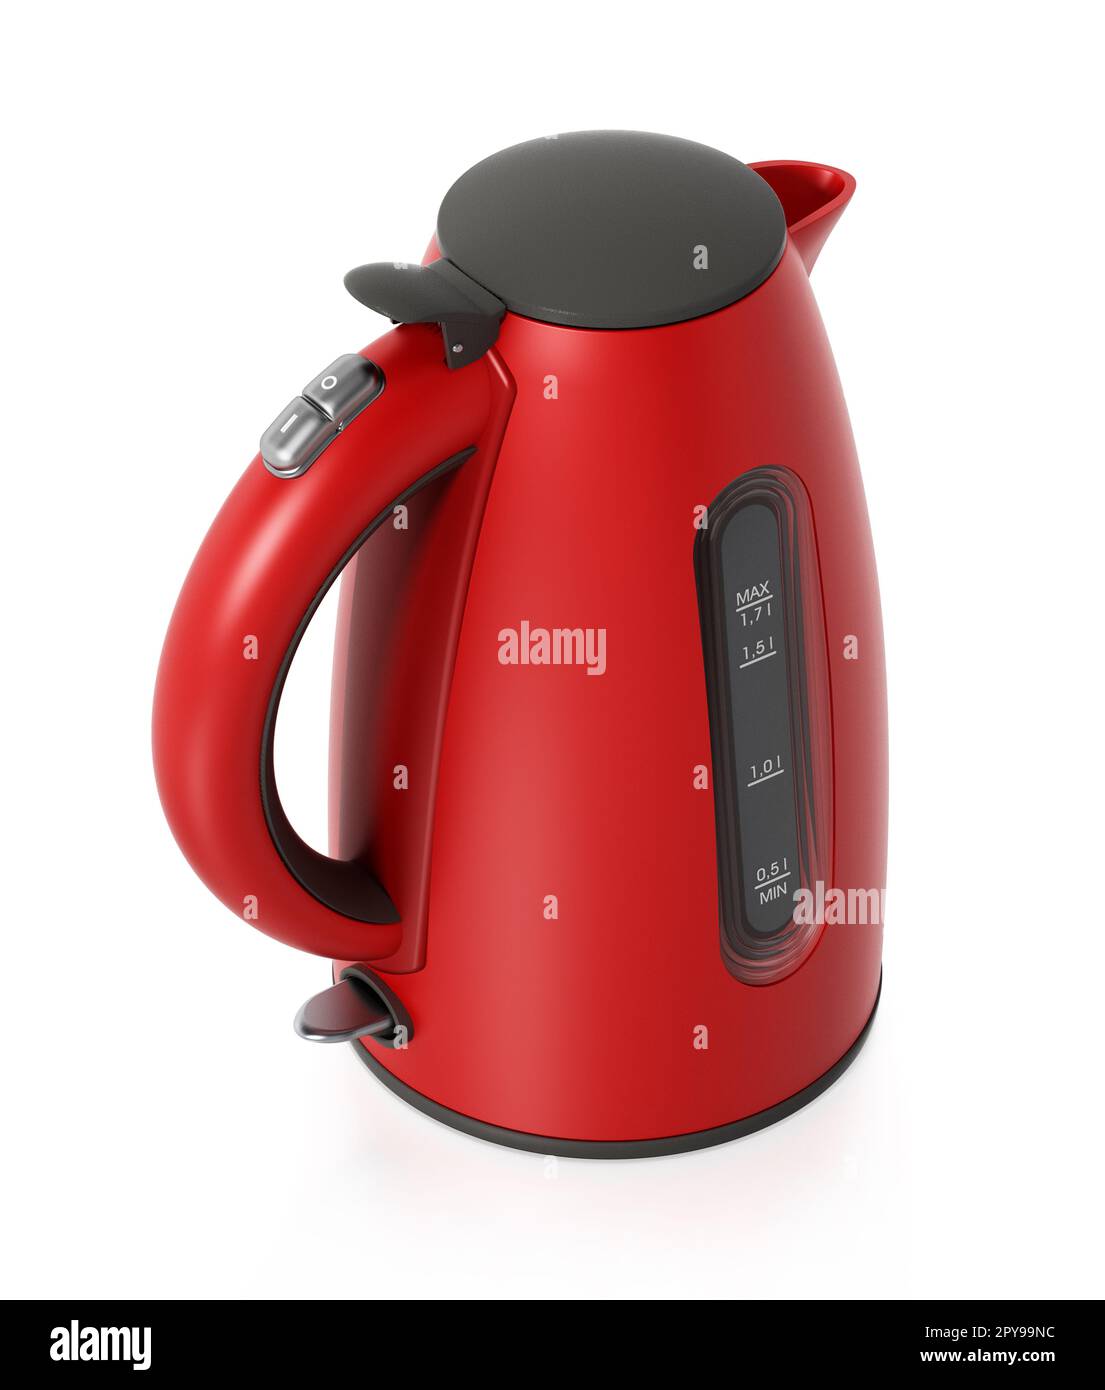 https://c8.alamy.com/comp/2PY99NC/red-plastic-electric-kettle-isolated-on-white-background-3d-illustration-2PY99NC.jpg